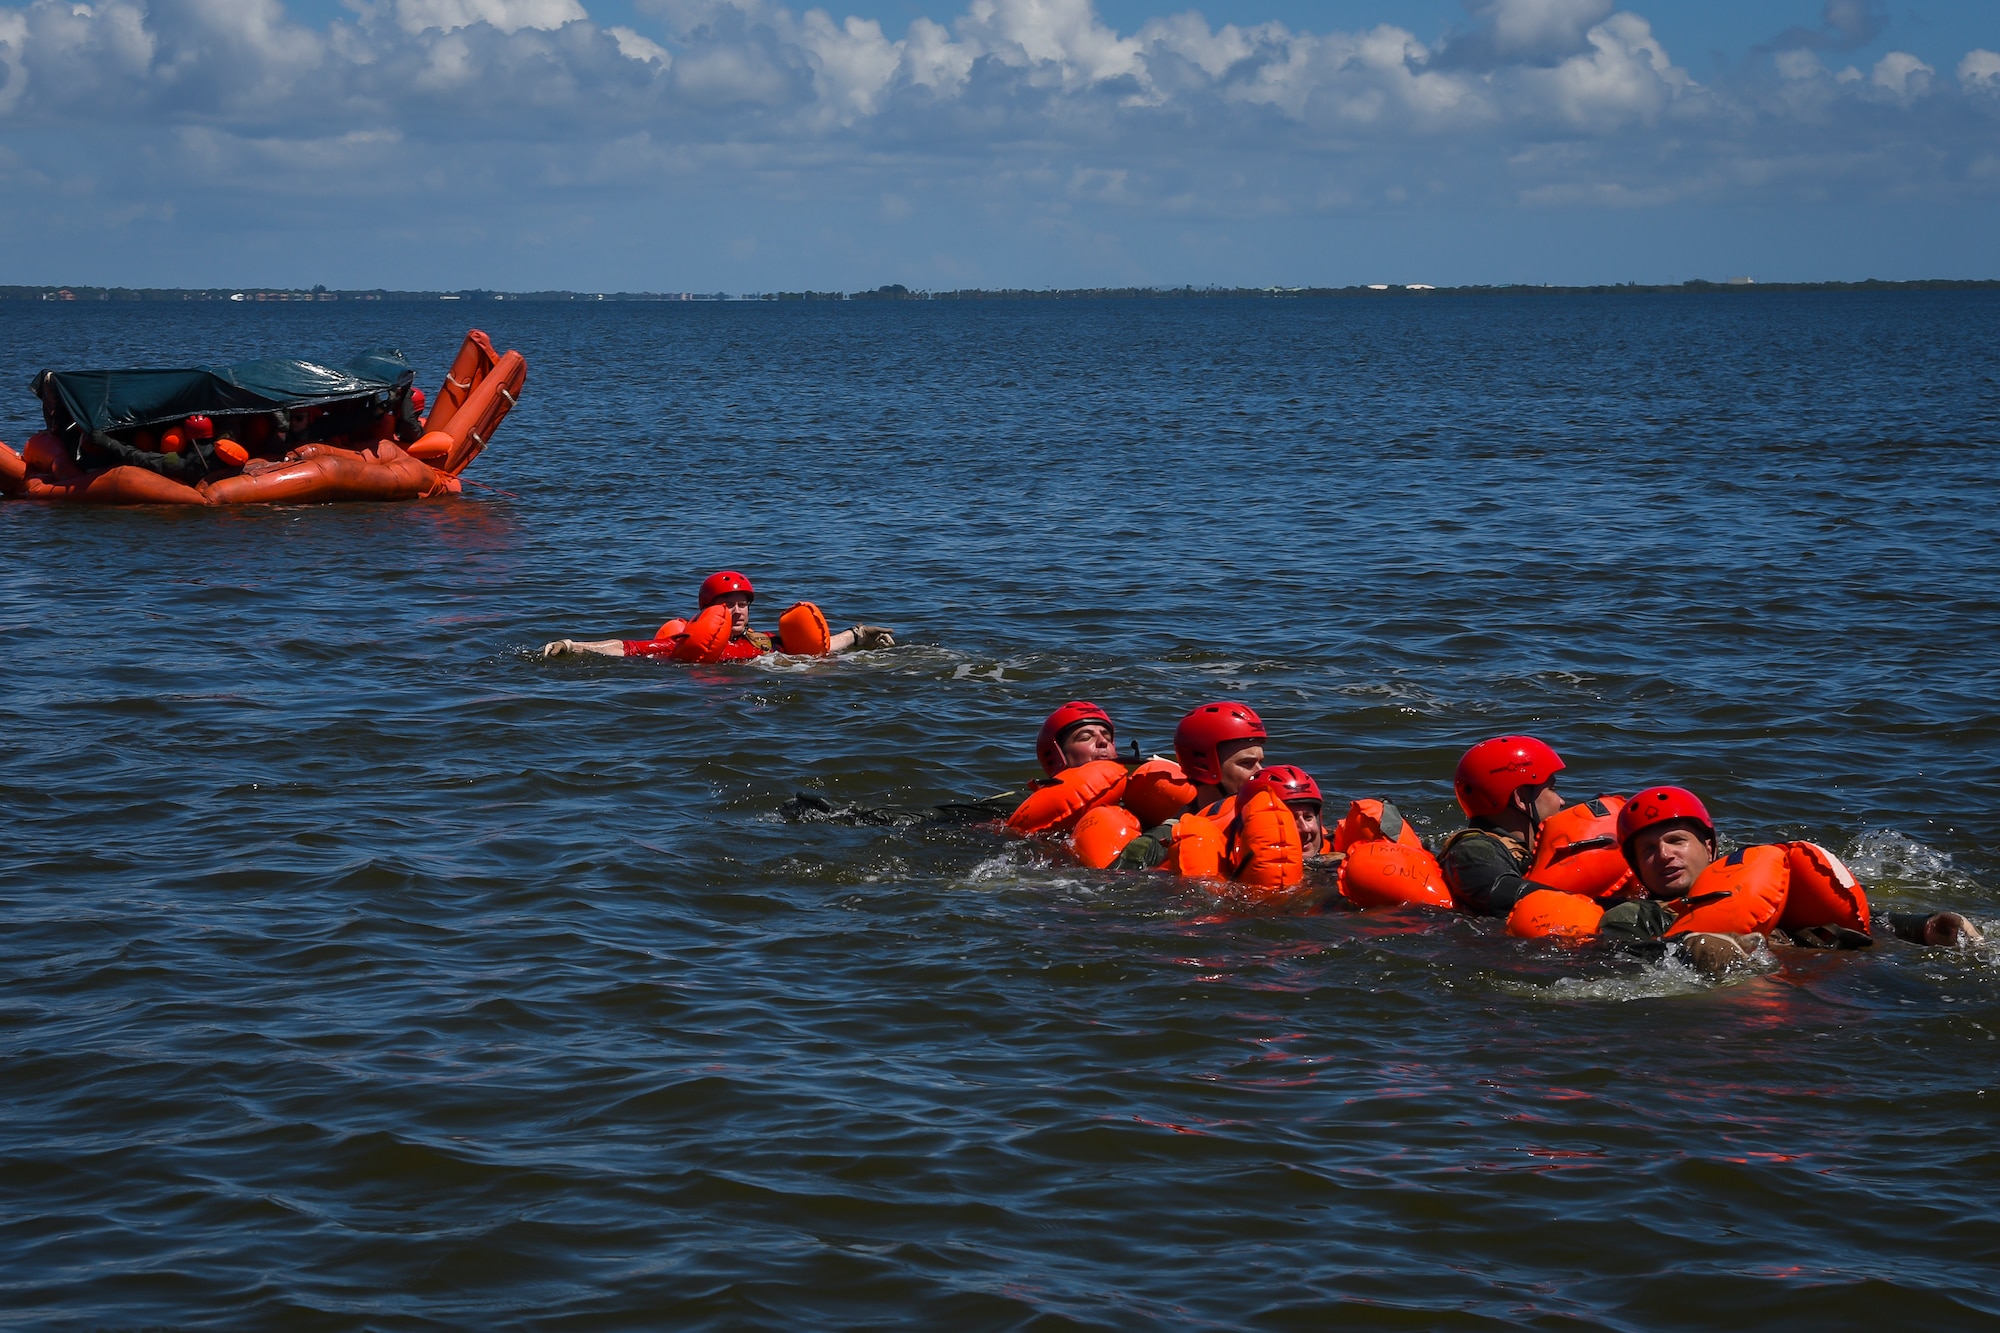 Aircrew from the 39th Rescue Squadron swim towards a life raft Aug. 4, 2018, during water survival training at Patrick Air Force Base, Florida.